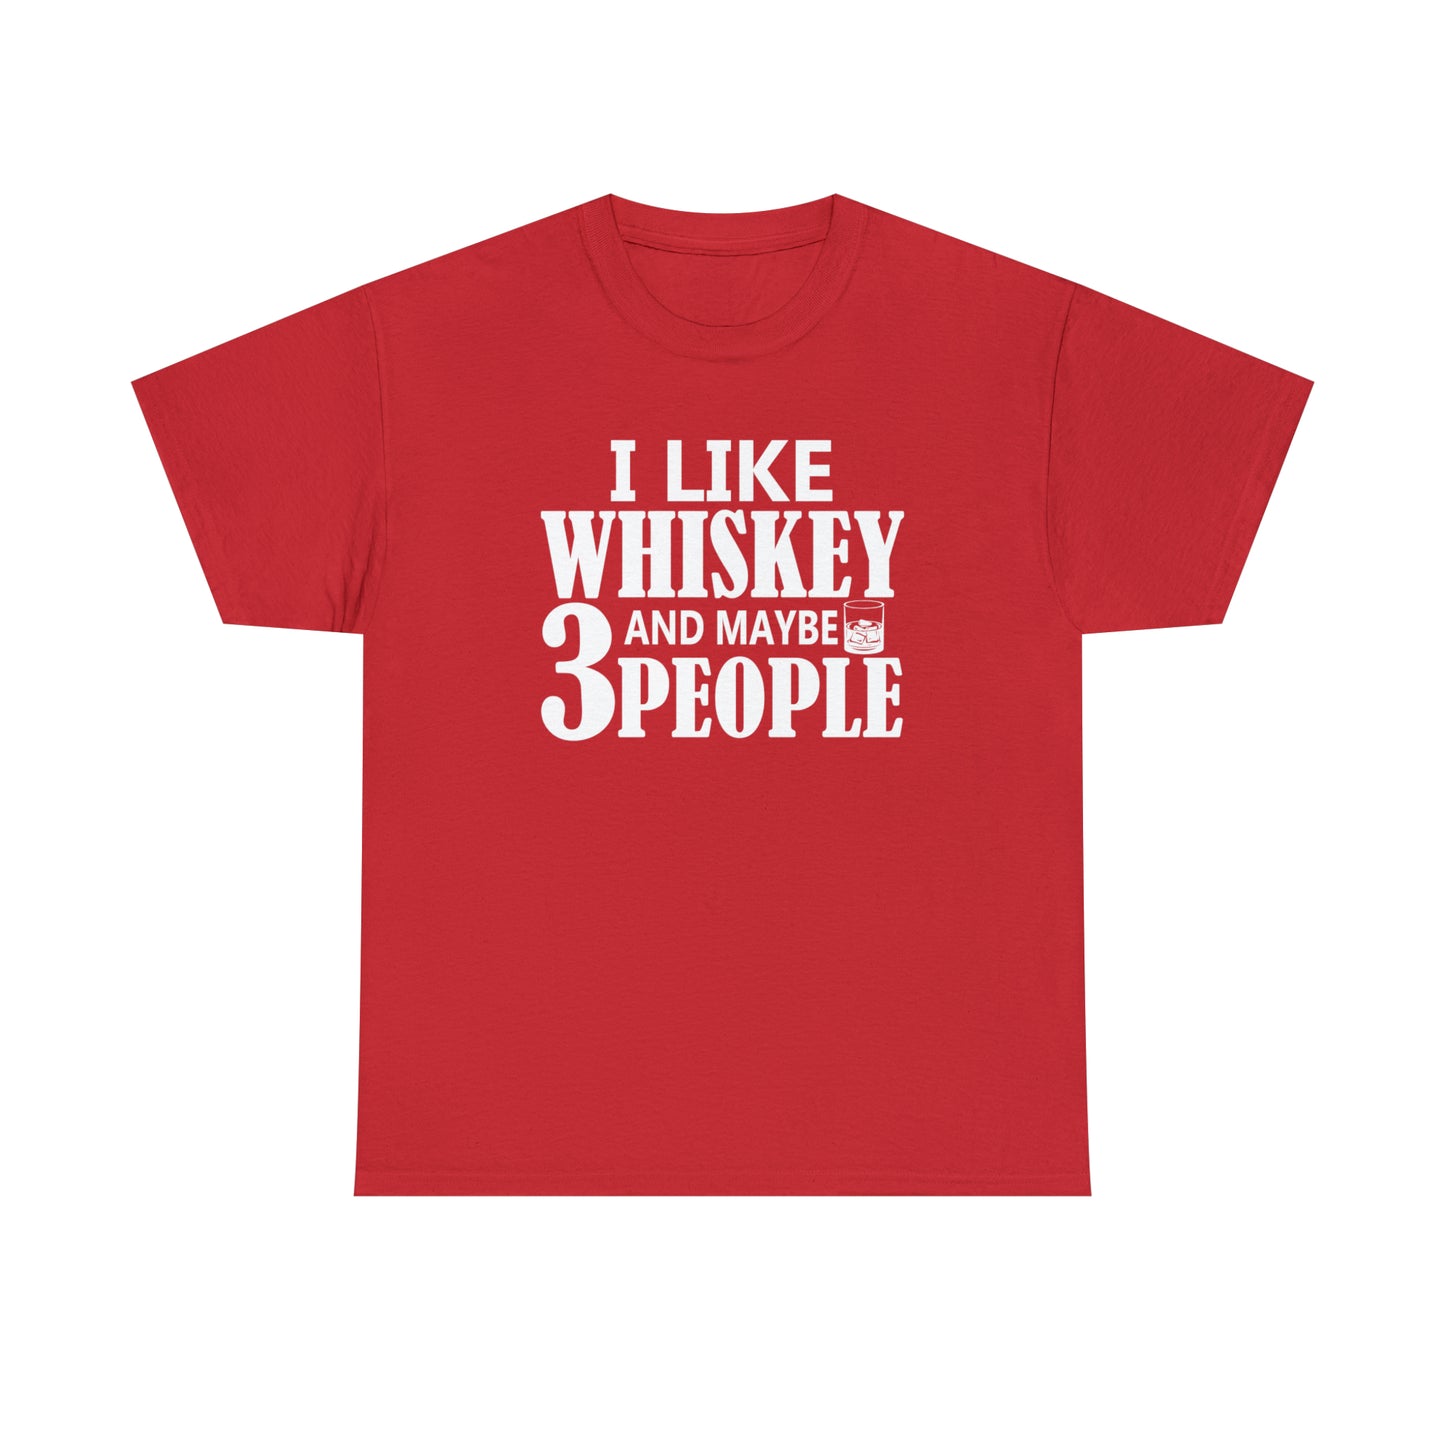 Whiskey humor t-shirt, a great gift for those with selective social preferences.